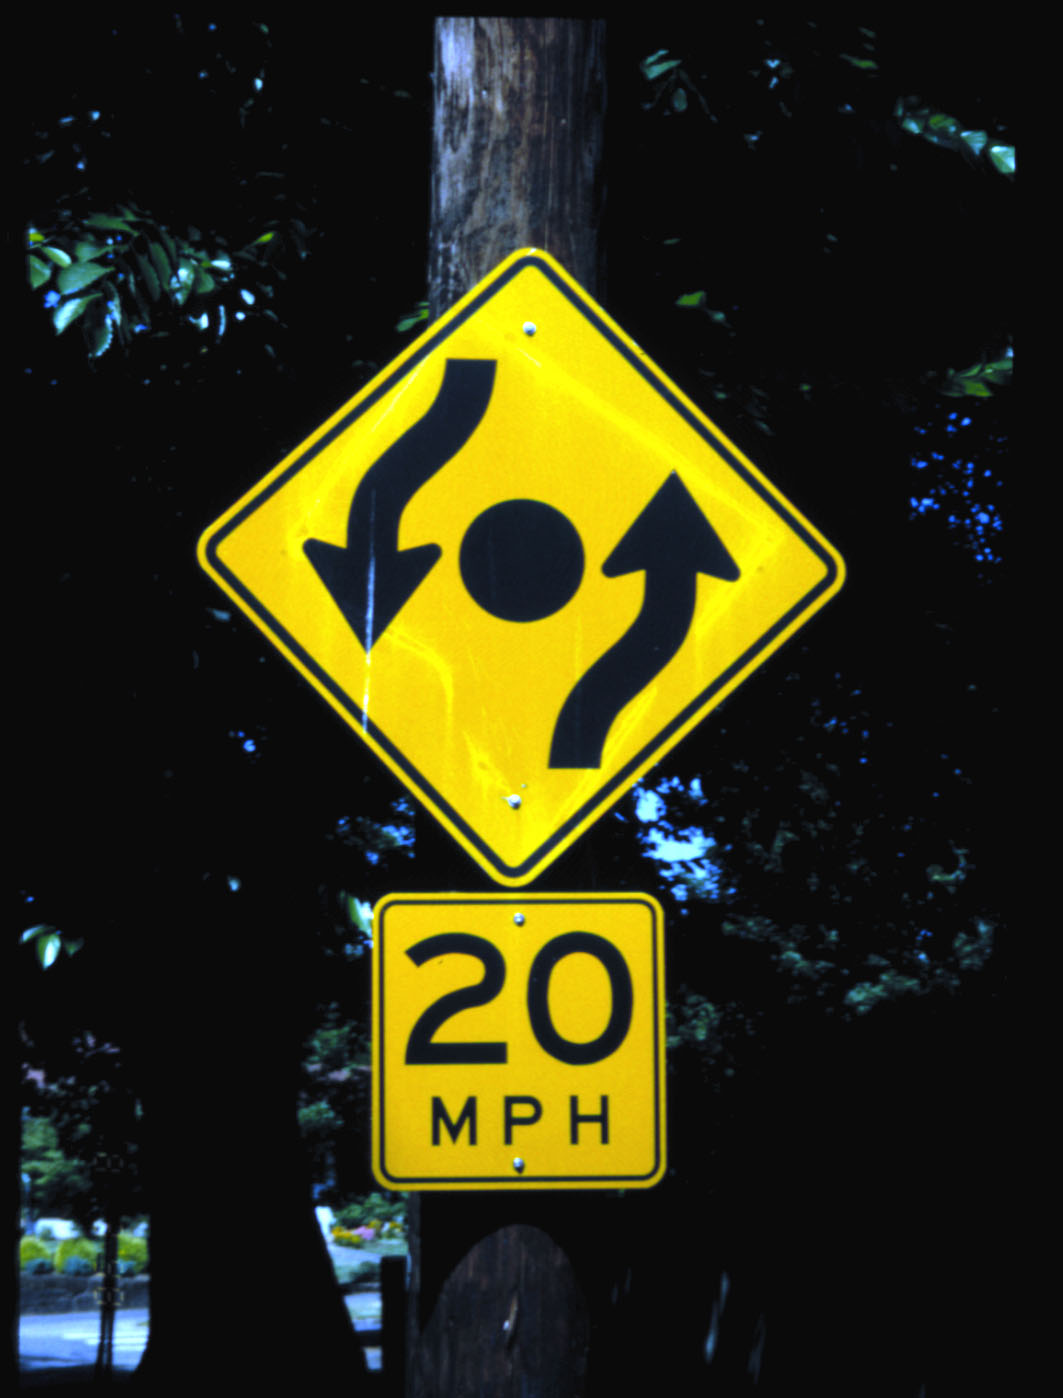 photo of yellow warning sign with a black downward-pointing curving arrow to the left of a black dot to the left of a black upward-pointing curving arrow; this sign is mounted above a sign with the words "20 mph"